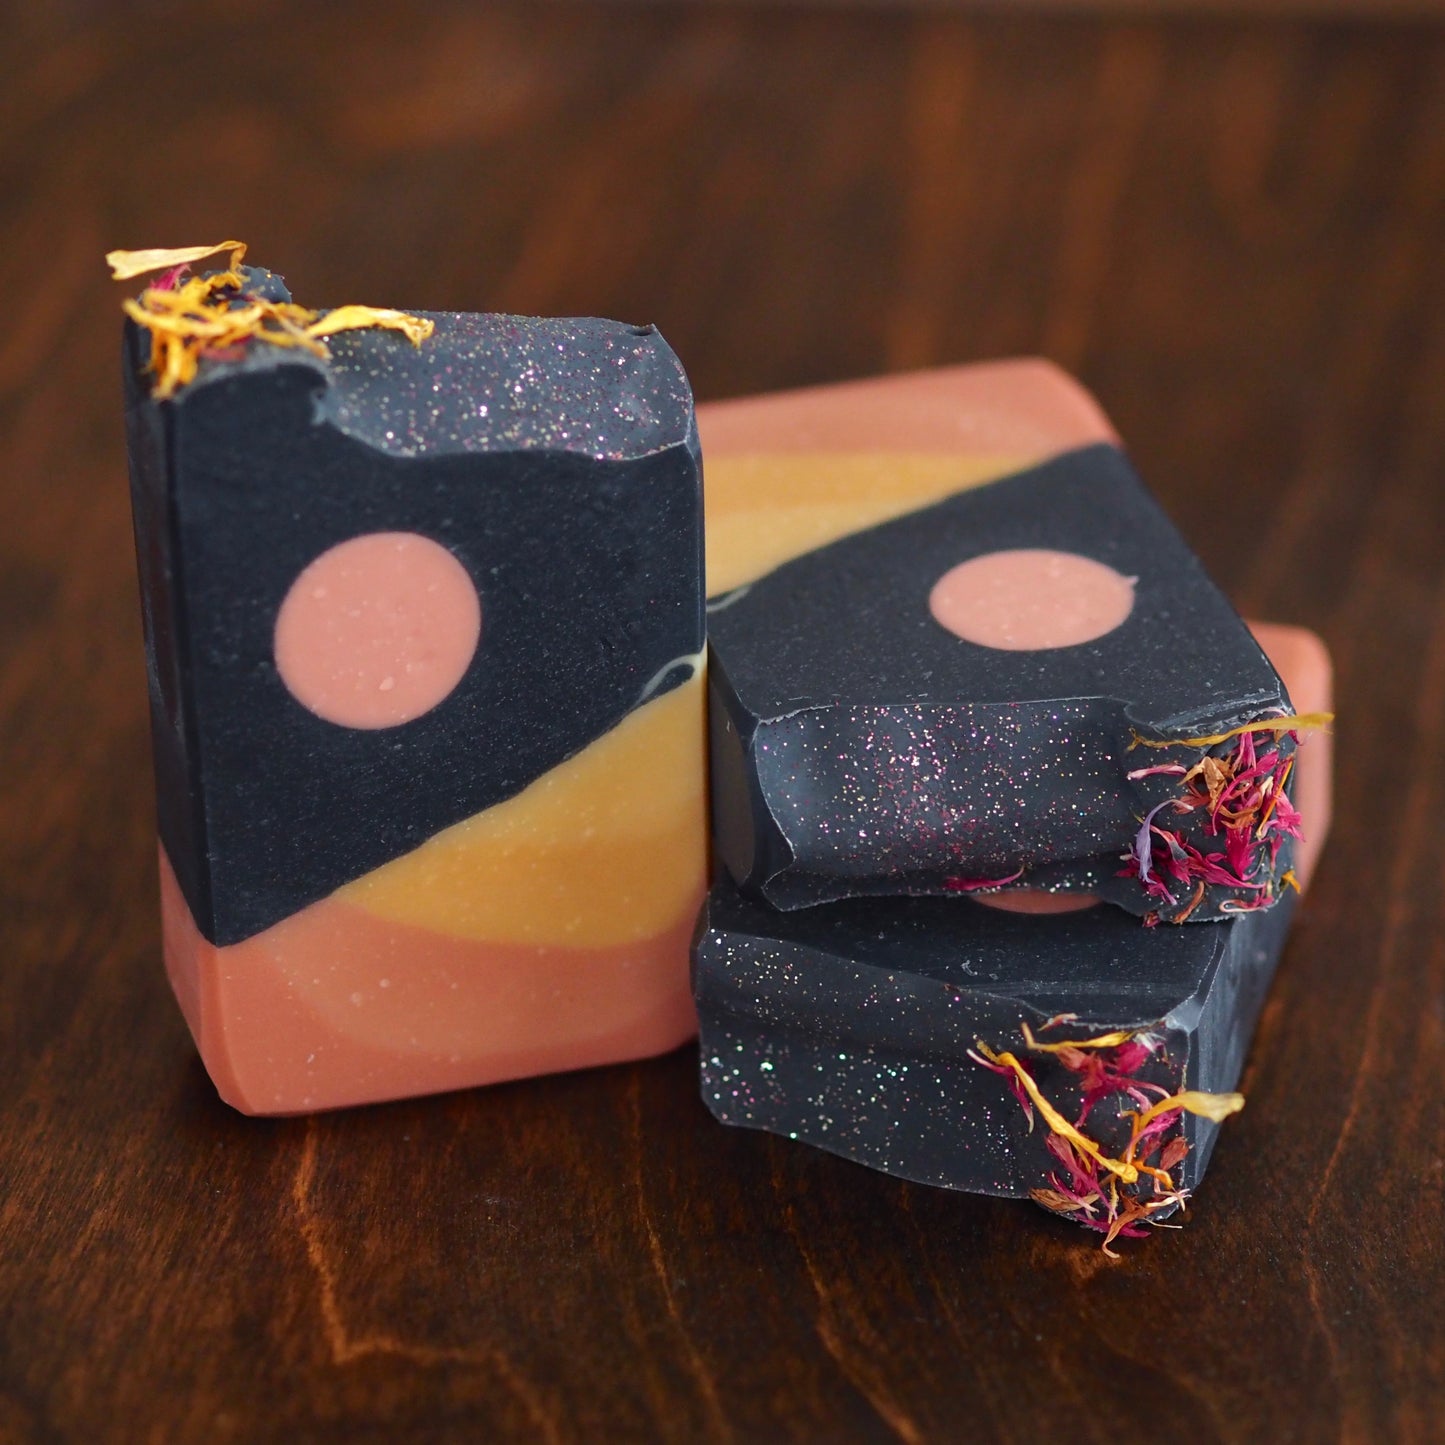 Flower Moon - May Full Moon Limited Edition Artisan Soap